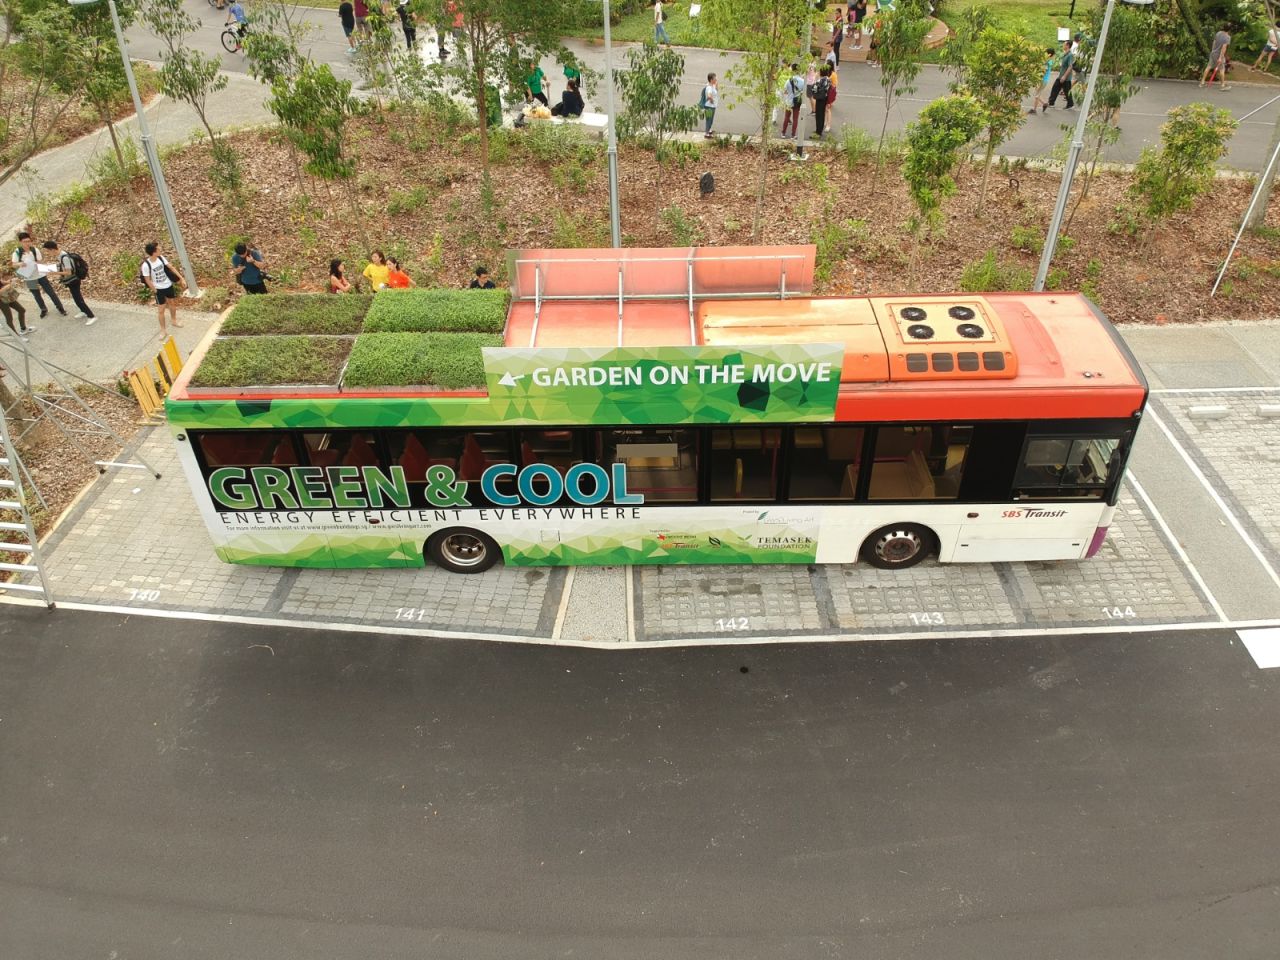 Urban greenery specialist GWS Living Art has installed green roofs on 10 public buses in Singapore. The "Garden on the Move" campaign is part of a trial to see whether plants can help to reduce the temperatures inside buses so that operators can save the fuel that is spent on air conditioning. 